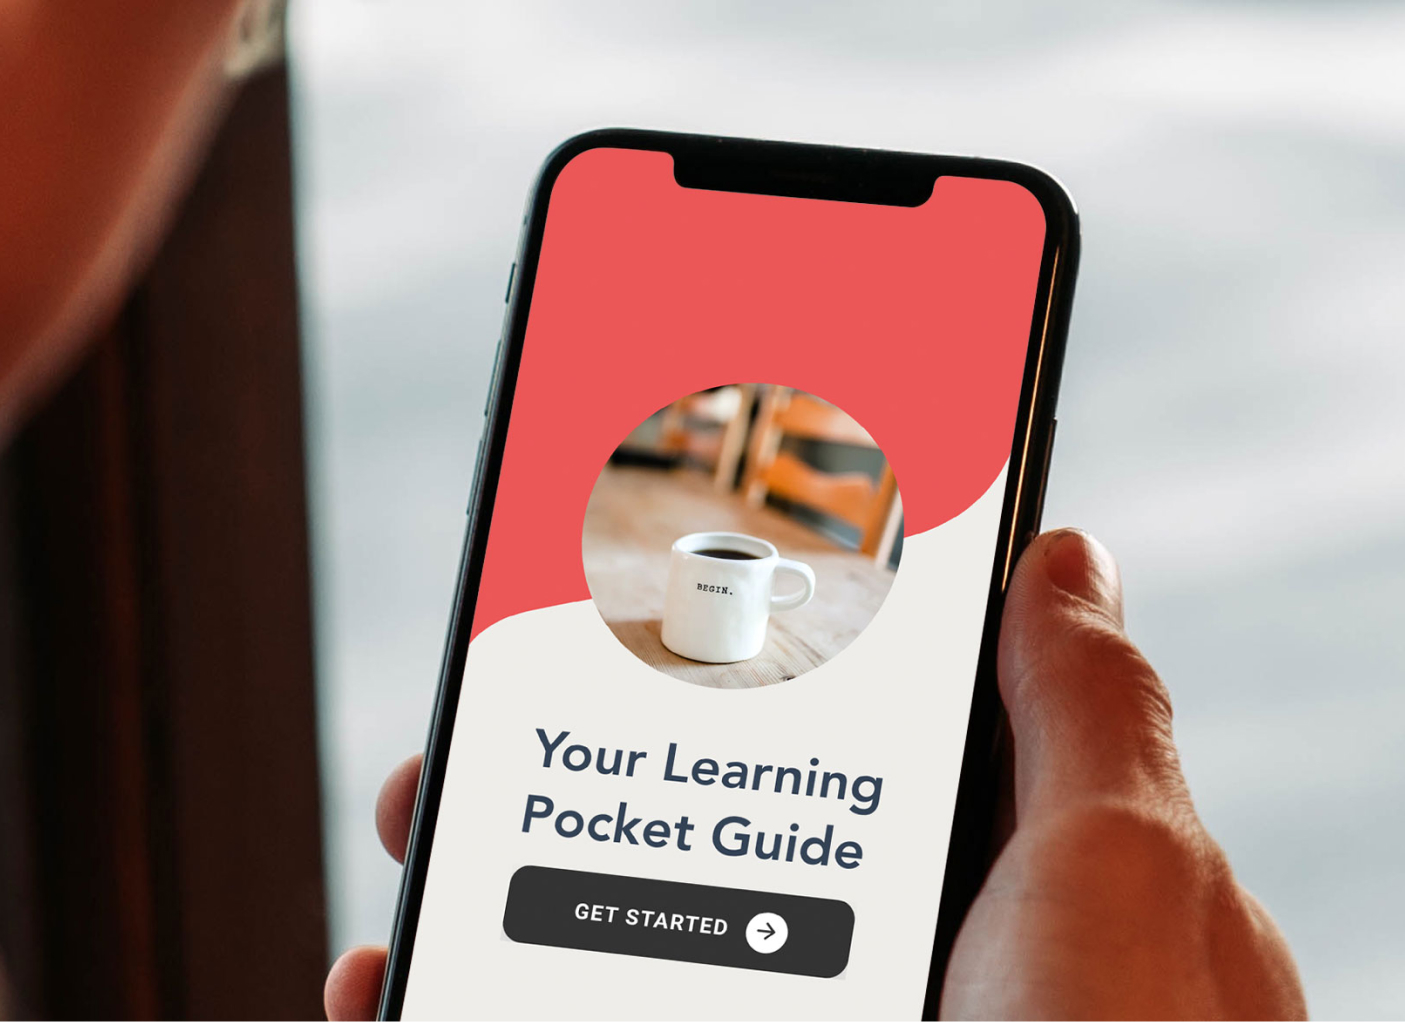 Designing for Employee Learning Experiences: a Mobile Pocket Learning Guide